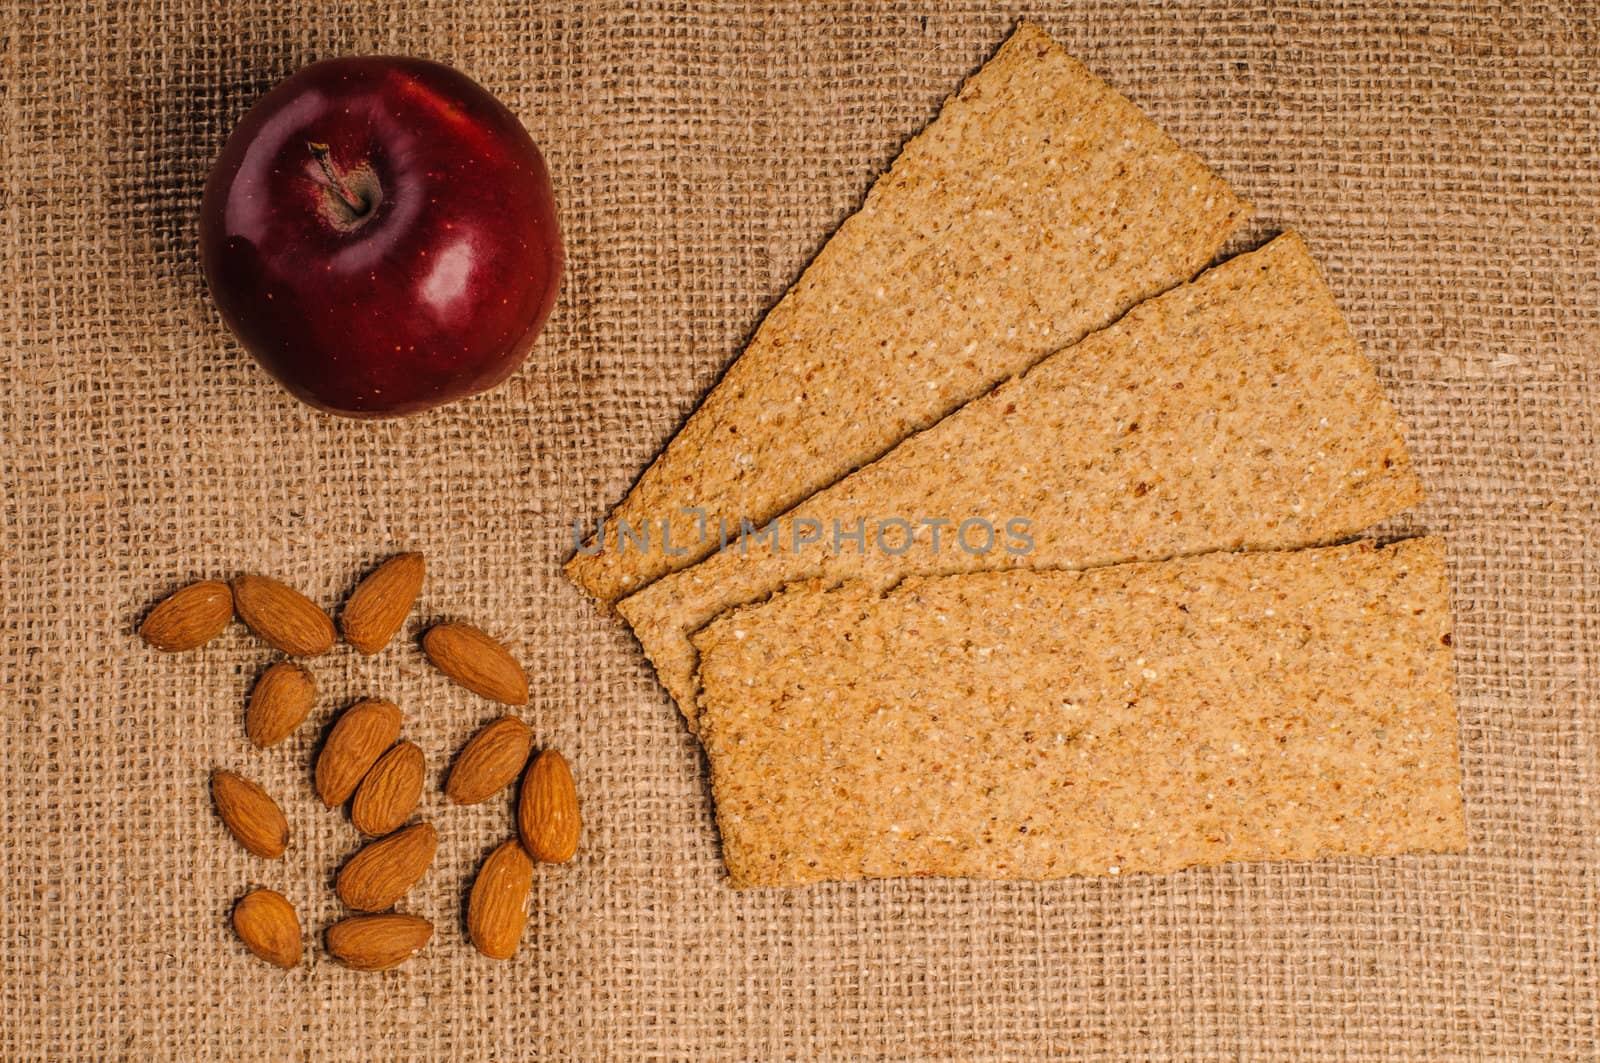 Red apple with crispbread and almonds by nvelichko